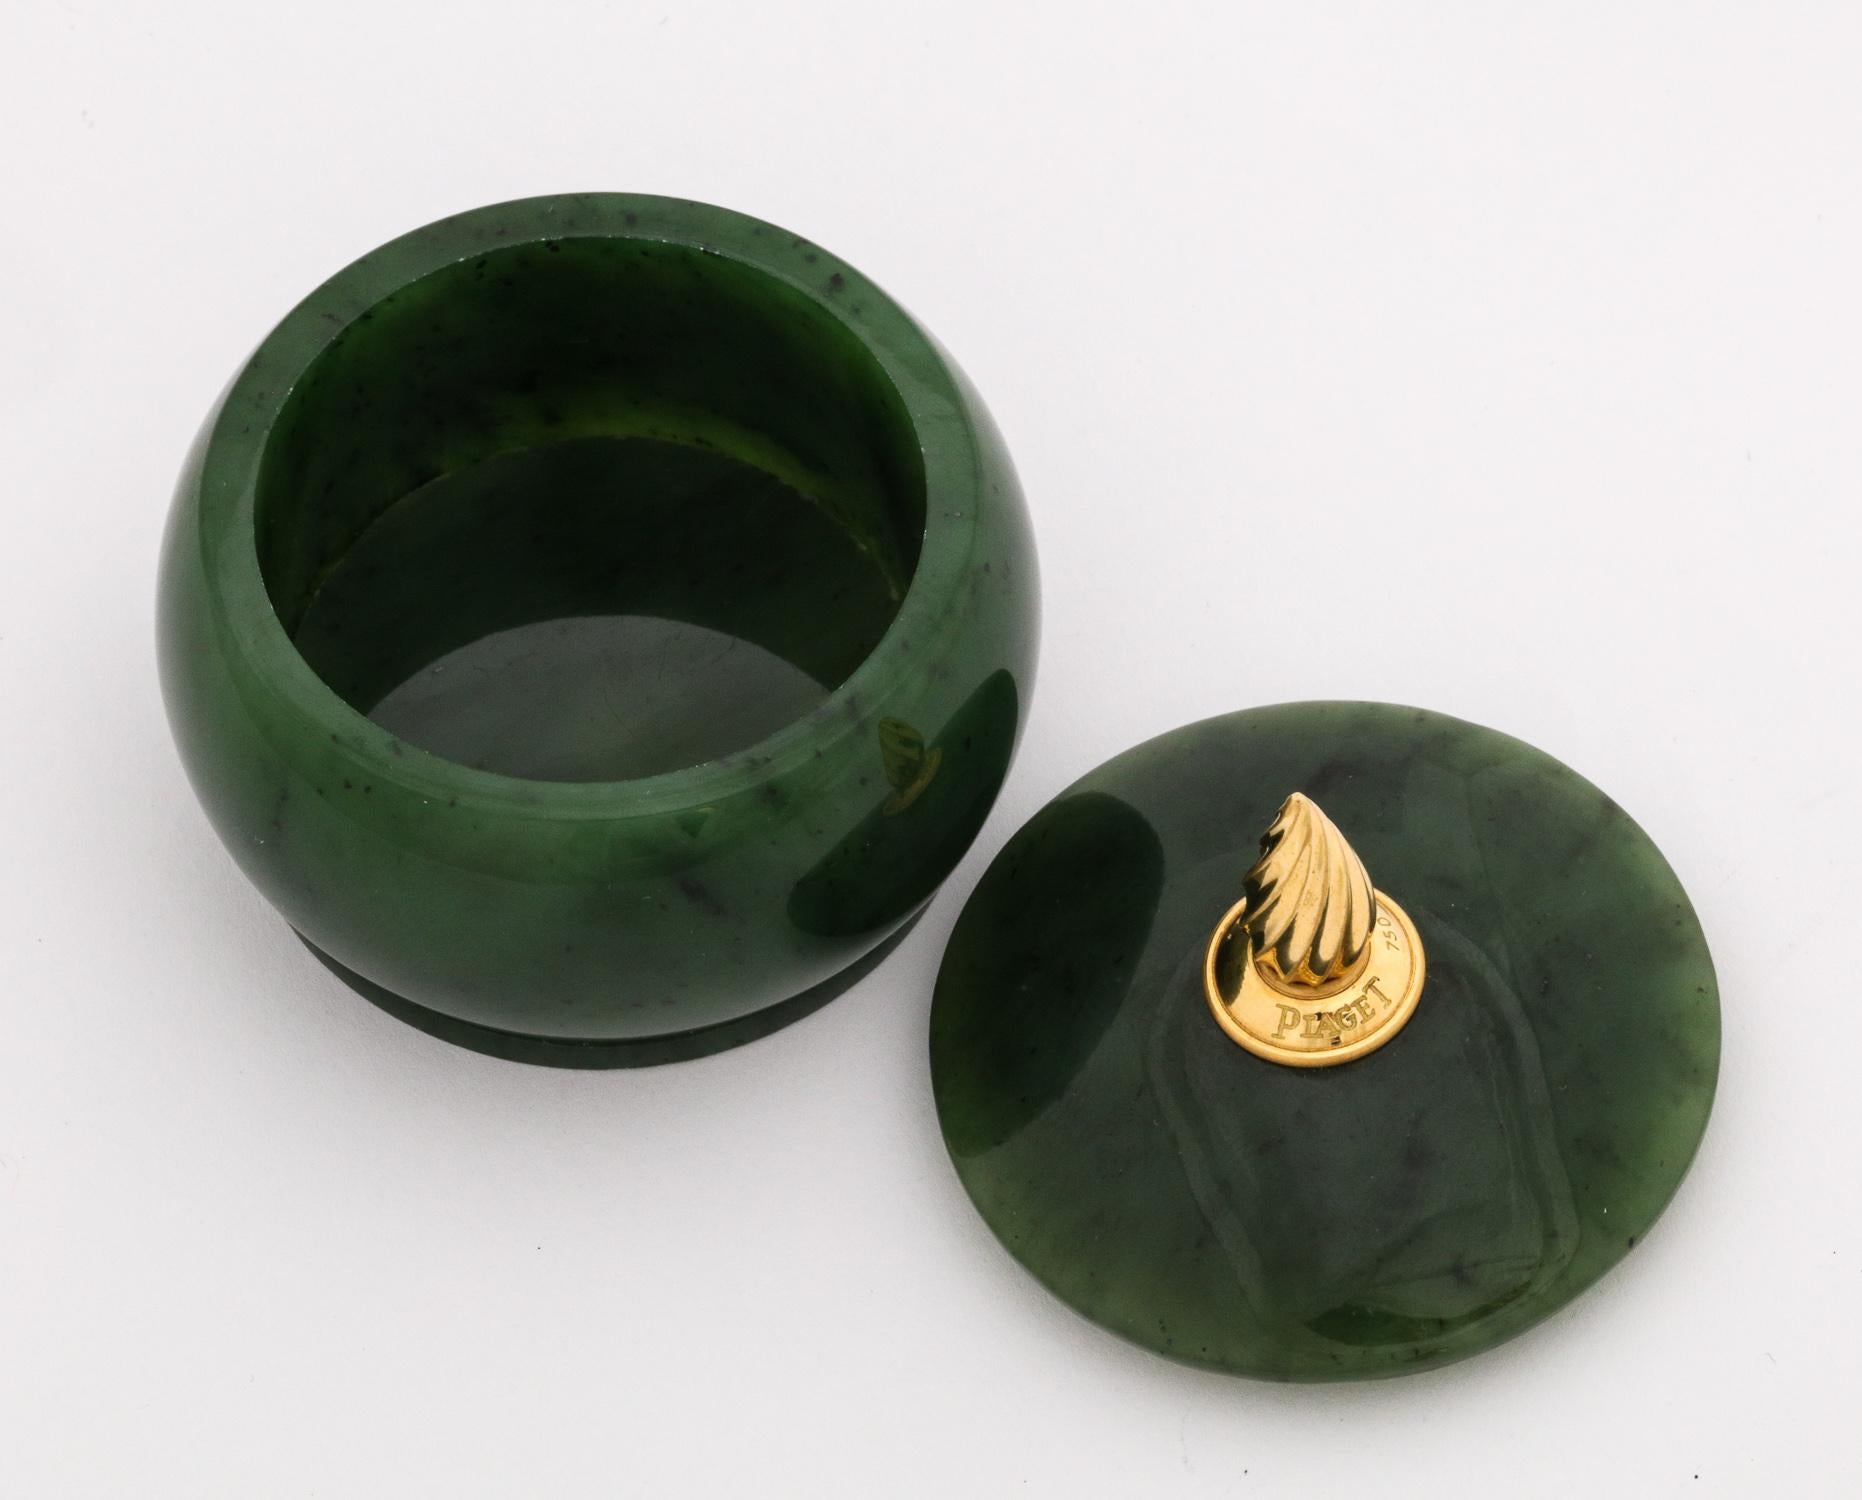 18-Karat Gold and Spinach Jade Round Box with Cover by Piaget Geneve 6